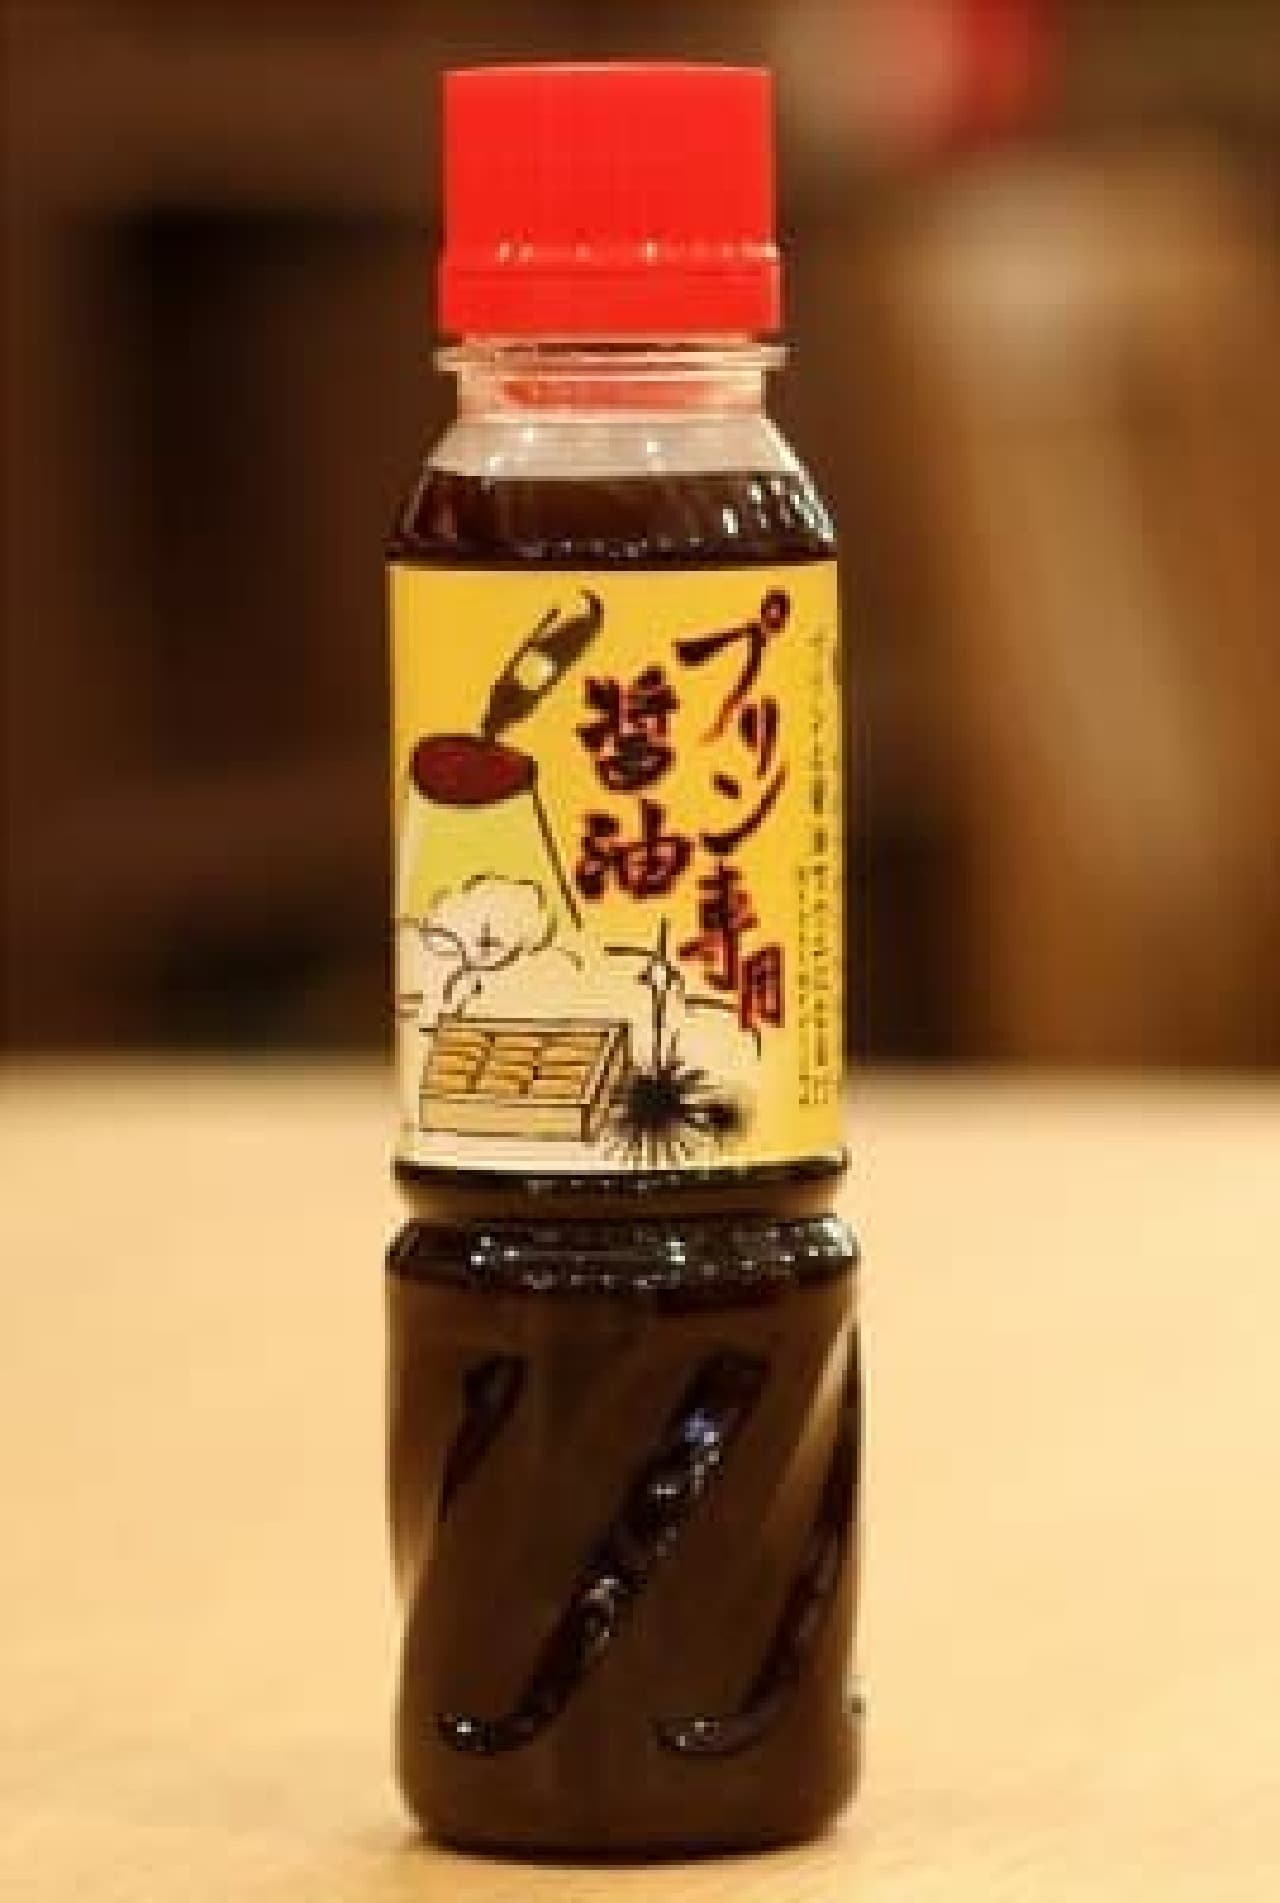 Finally, soy sauce for pudding has arrived